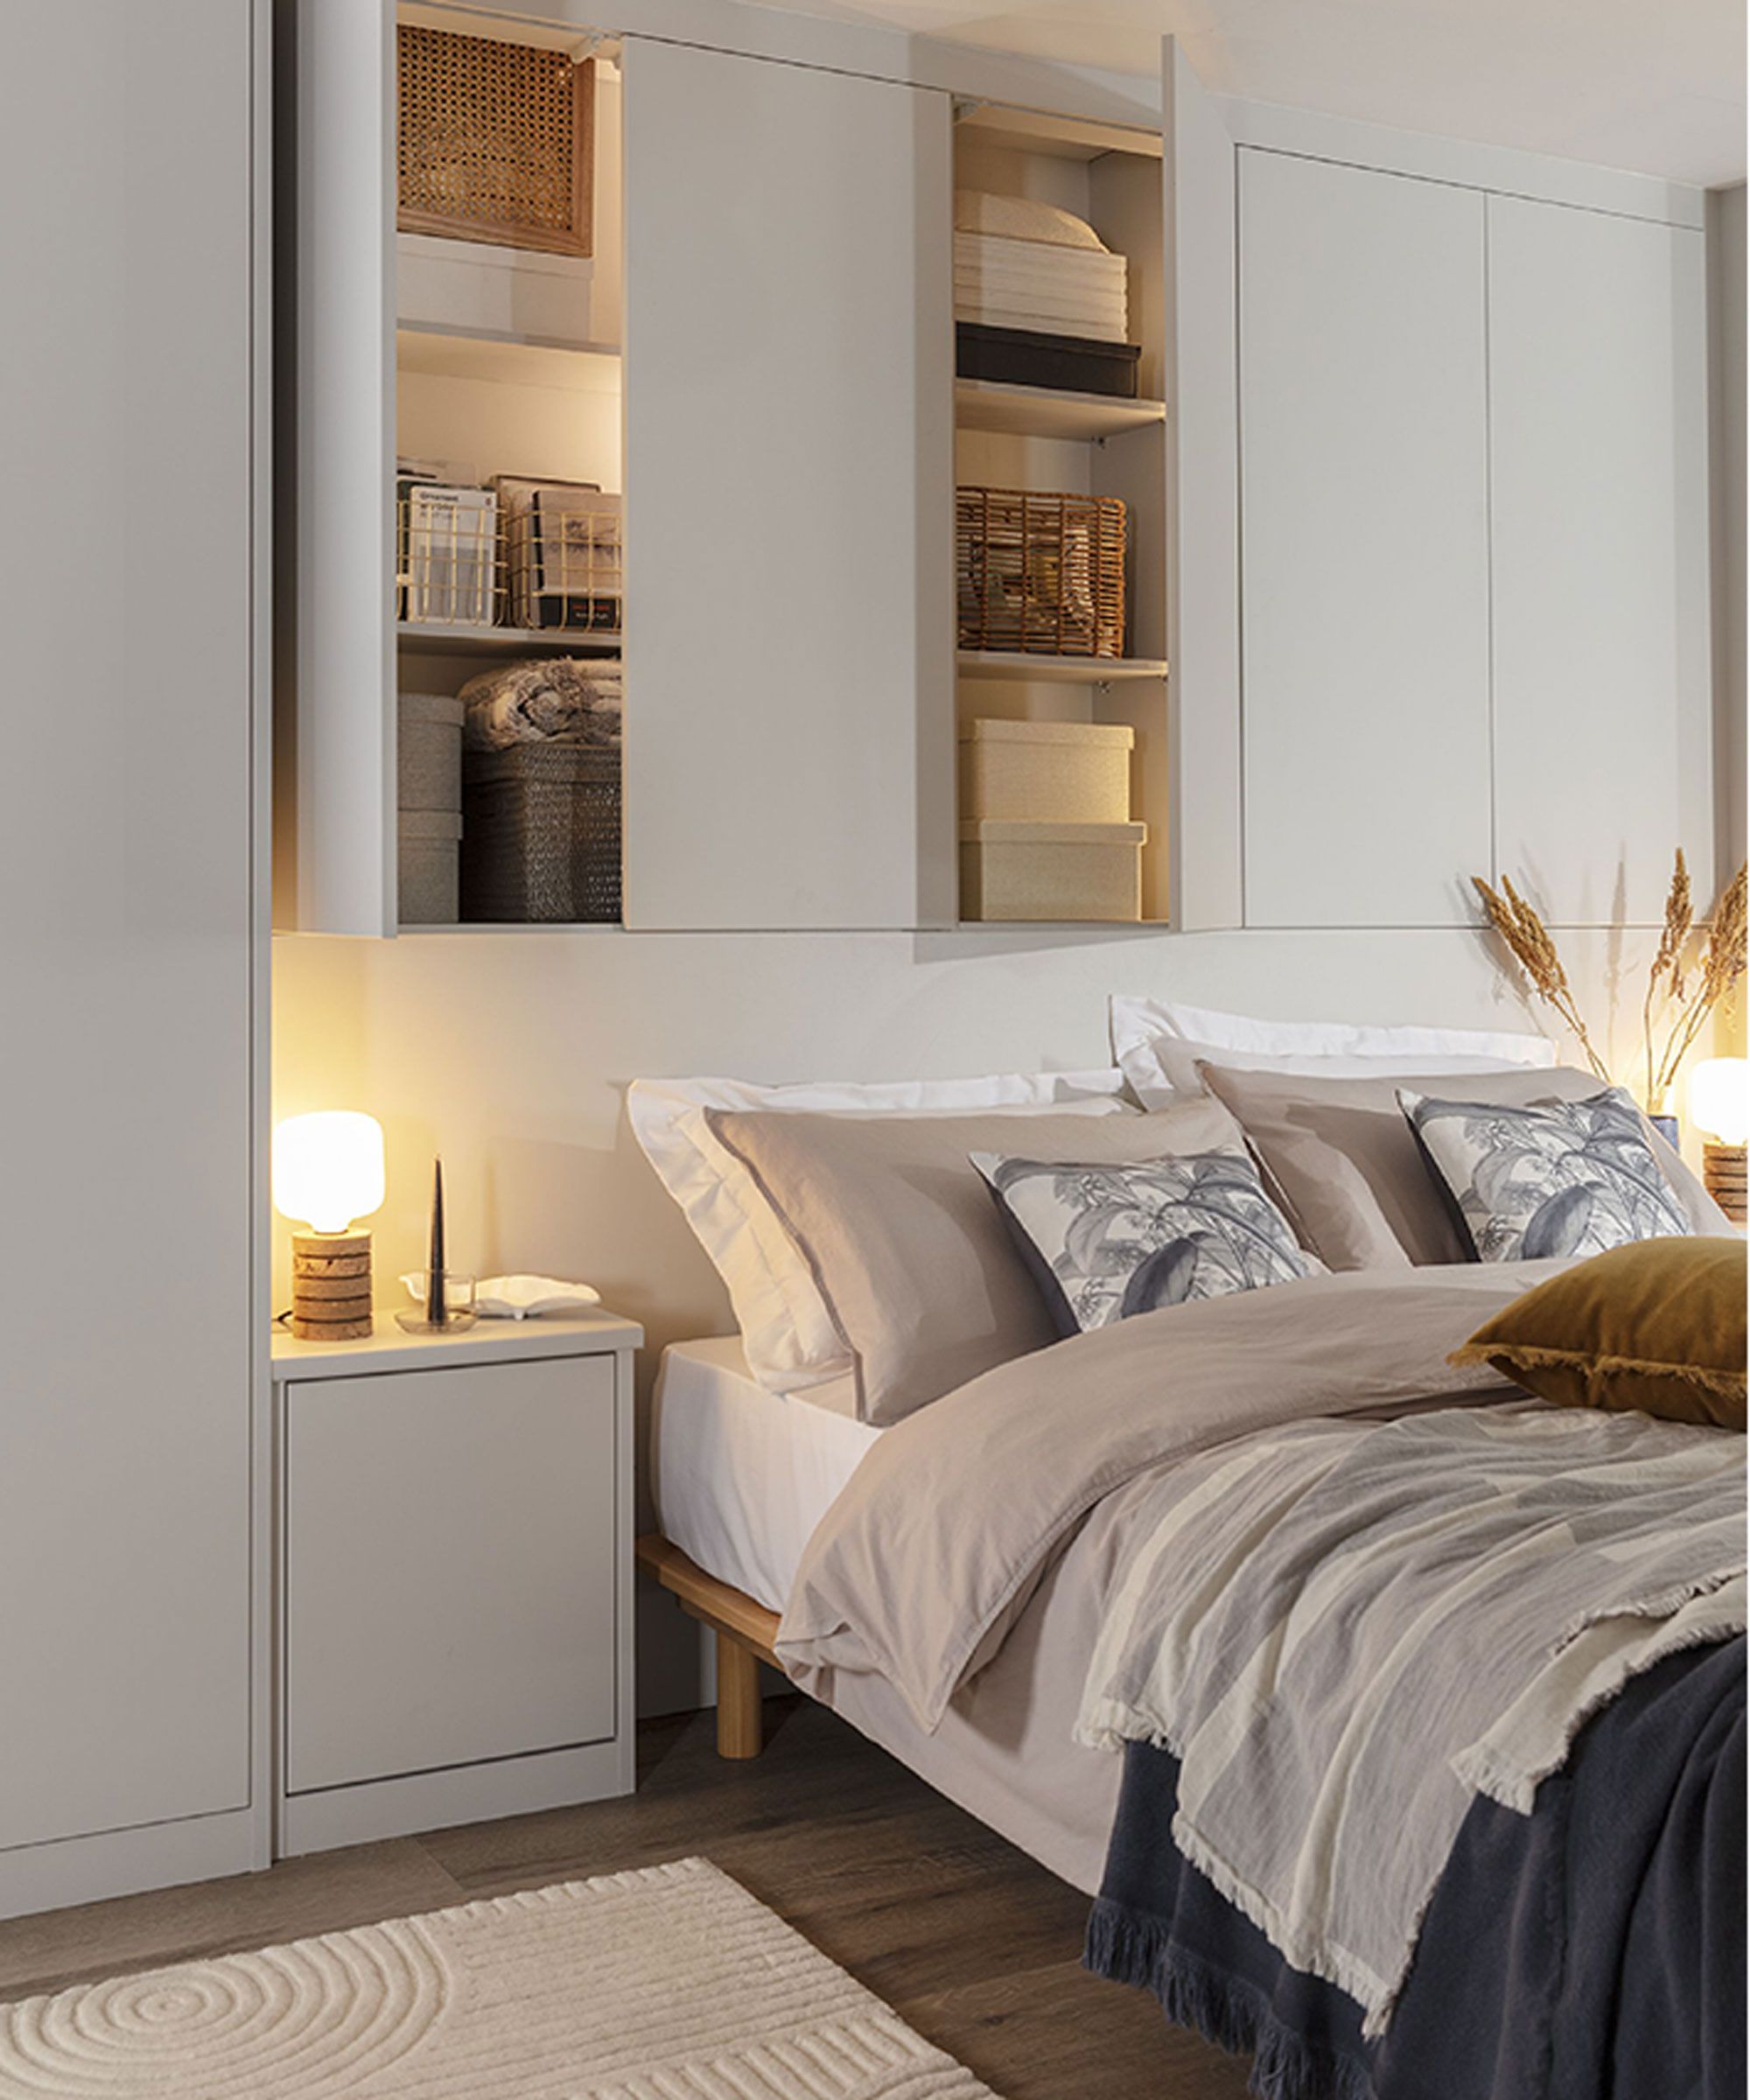 Overbed Storage Ideas – Ways To Boost Bedroom Stash Space | With Overbed Wardrobes (View 10 of 20)